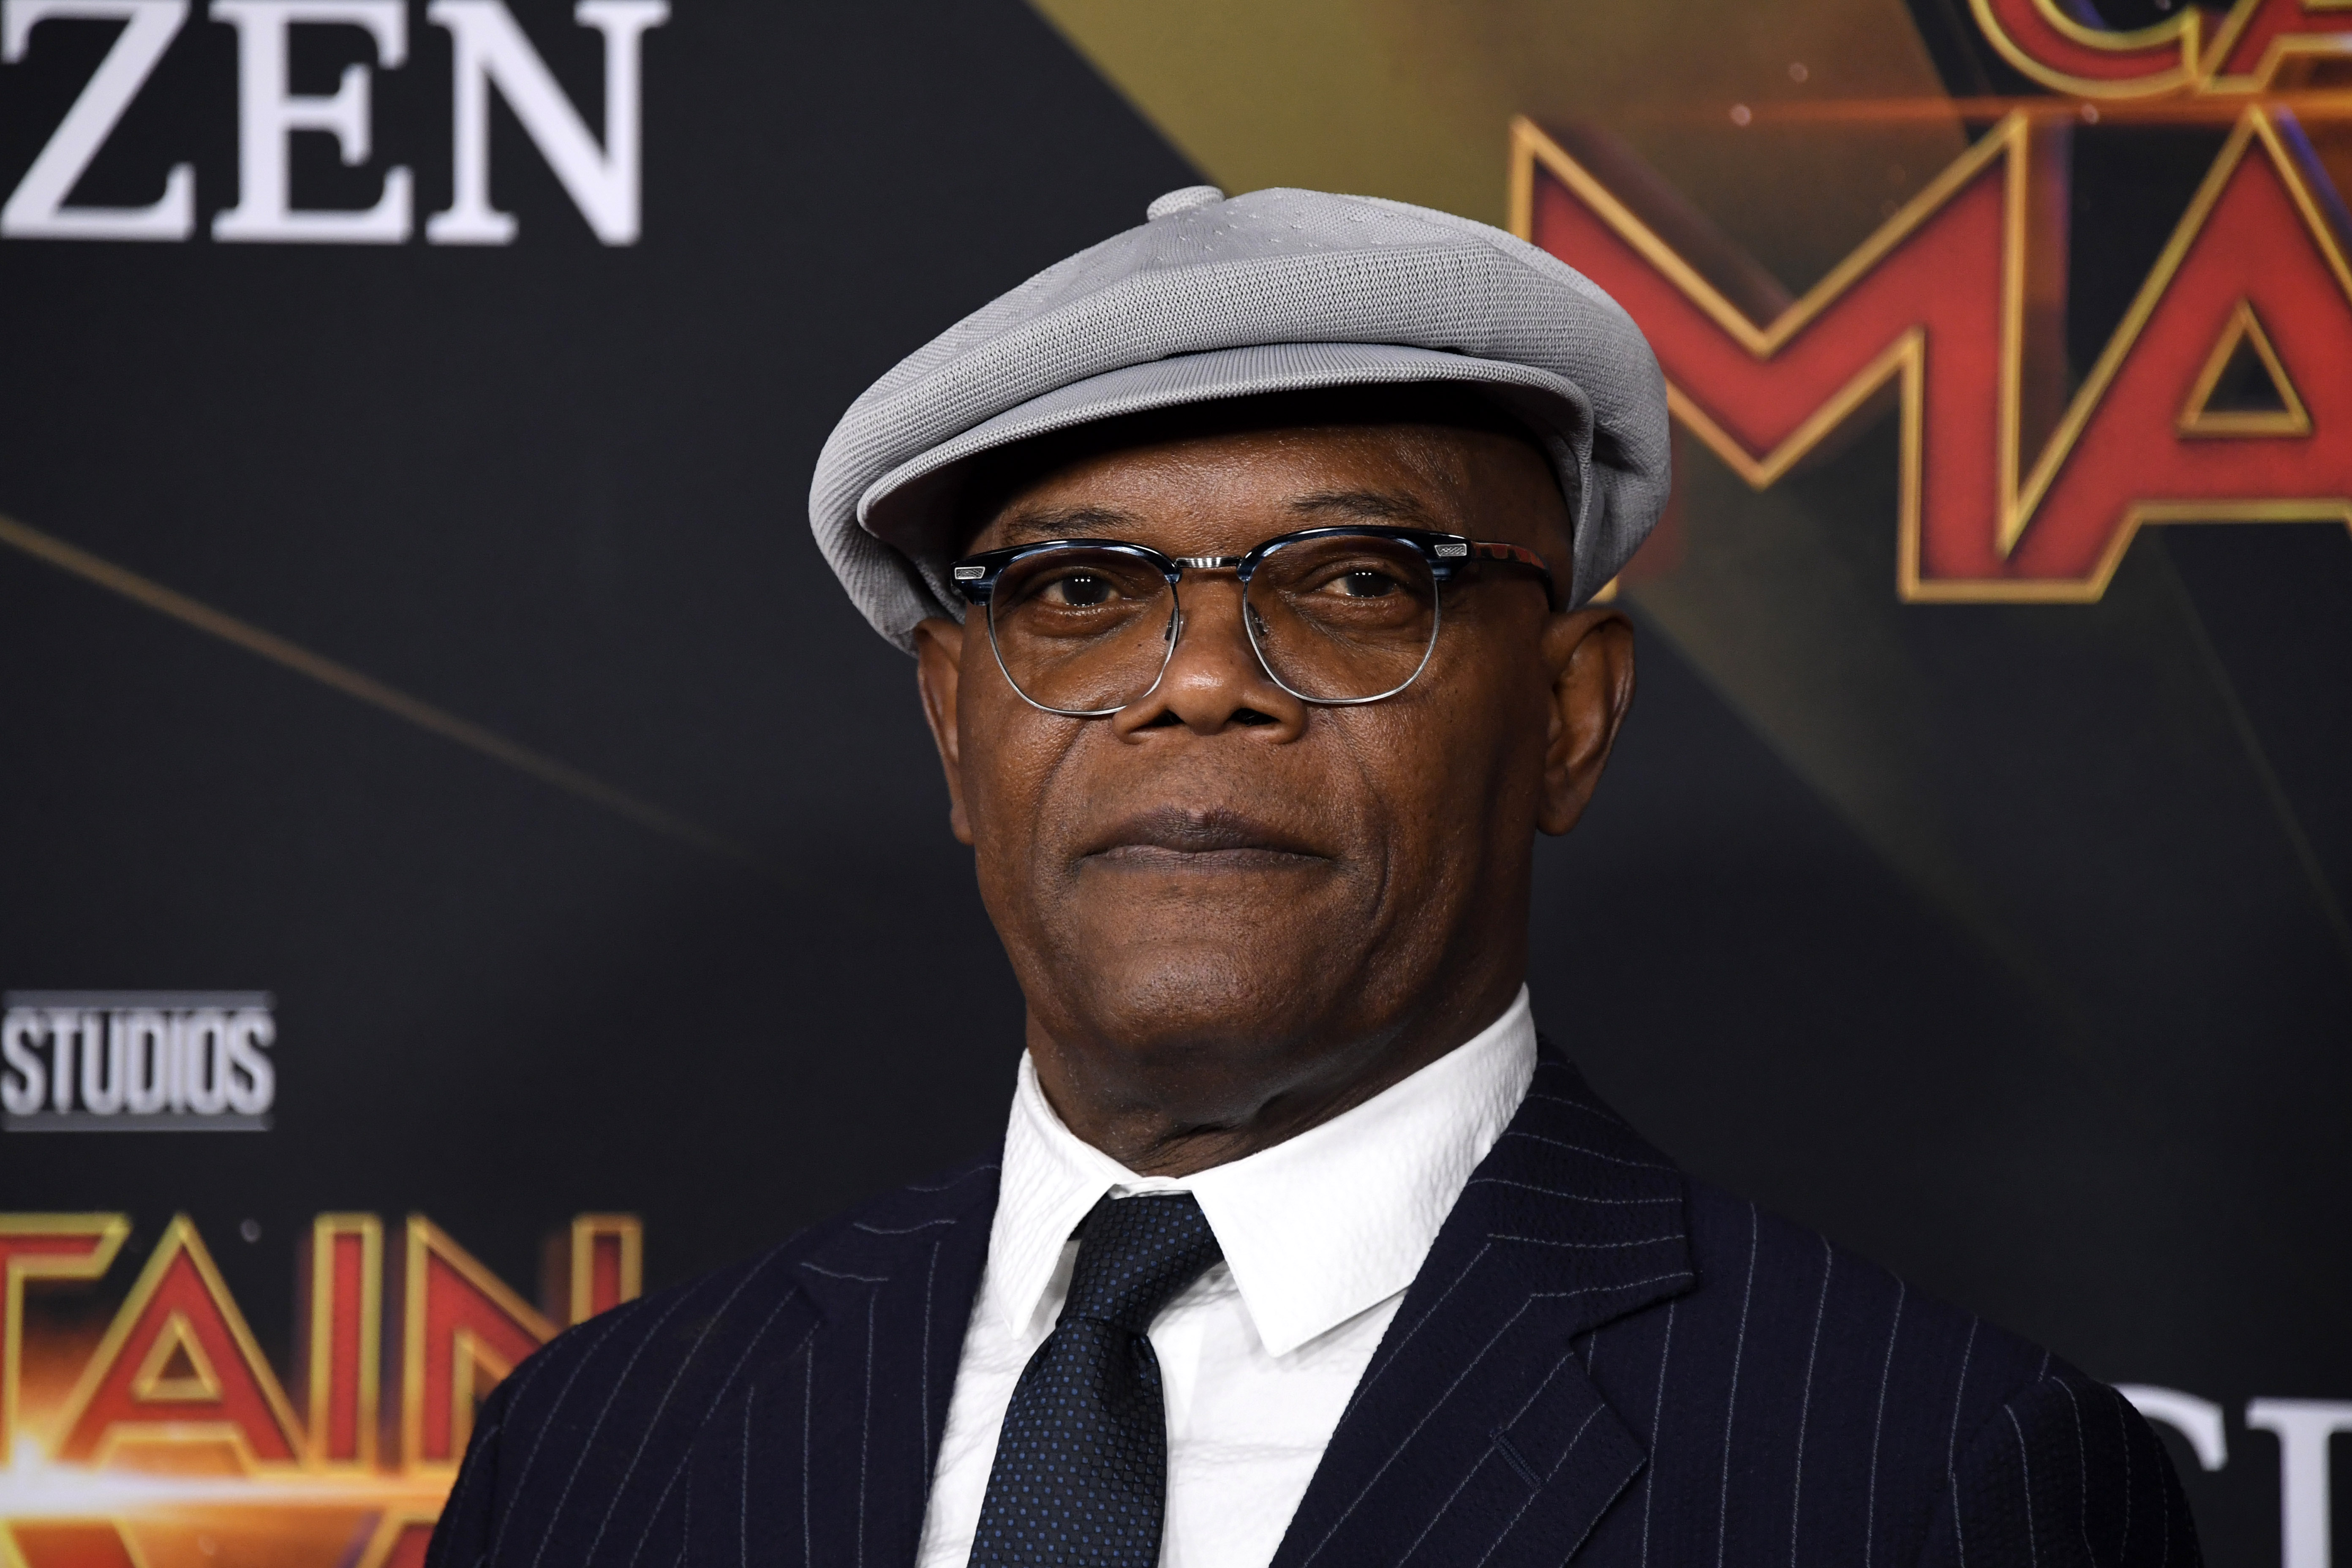 Samuel L. Jackson doesn't care if his Trump stance costs him fans | Fox News